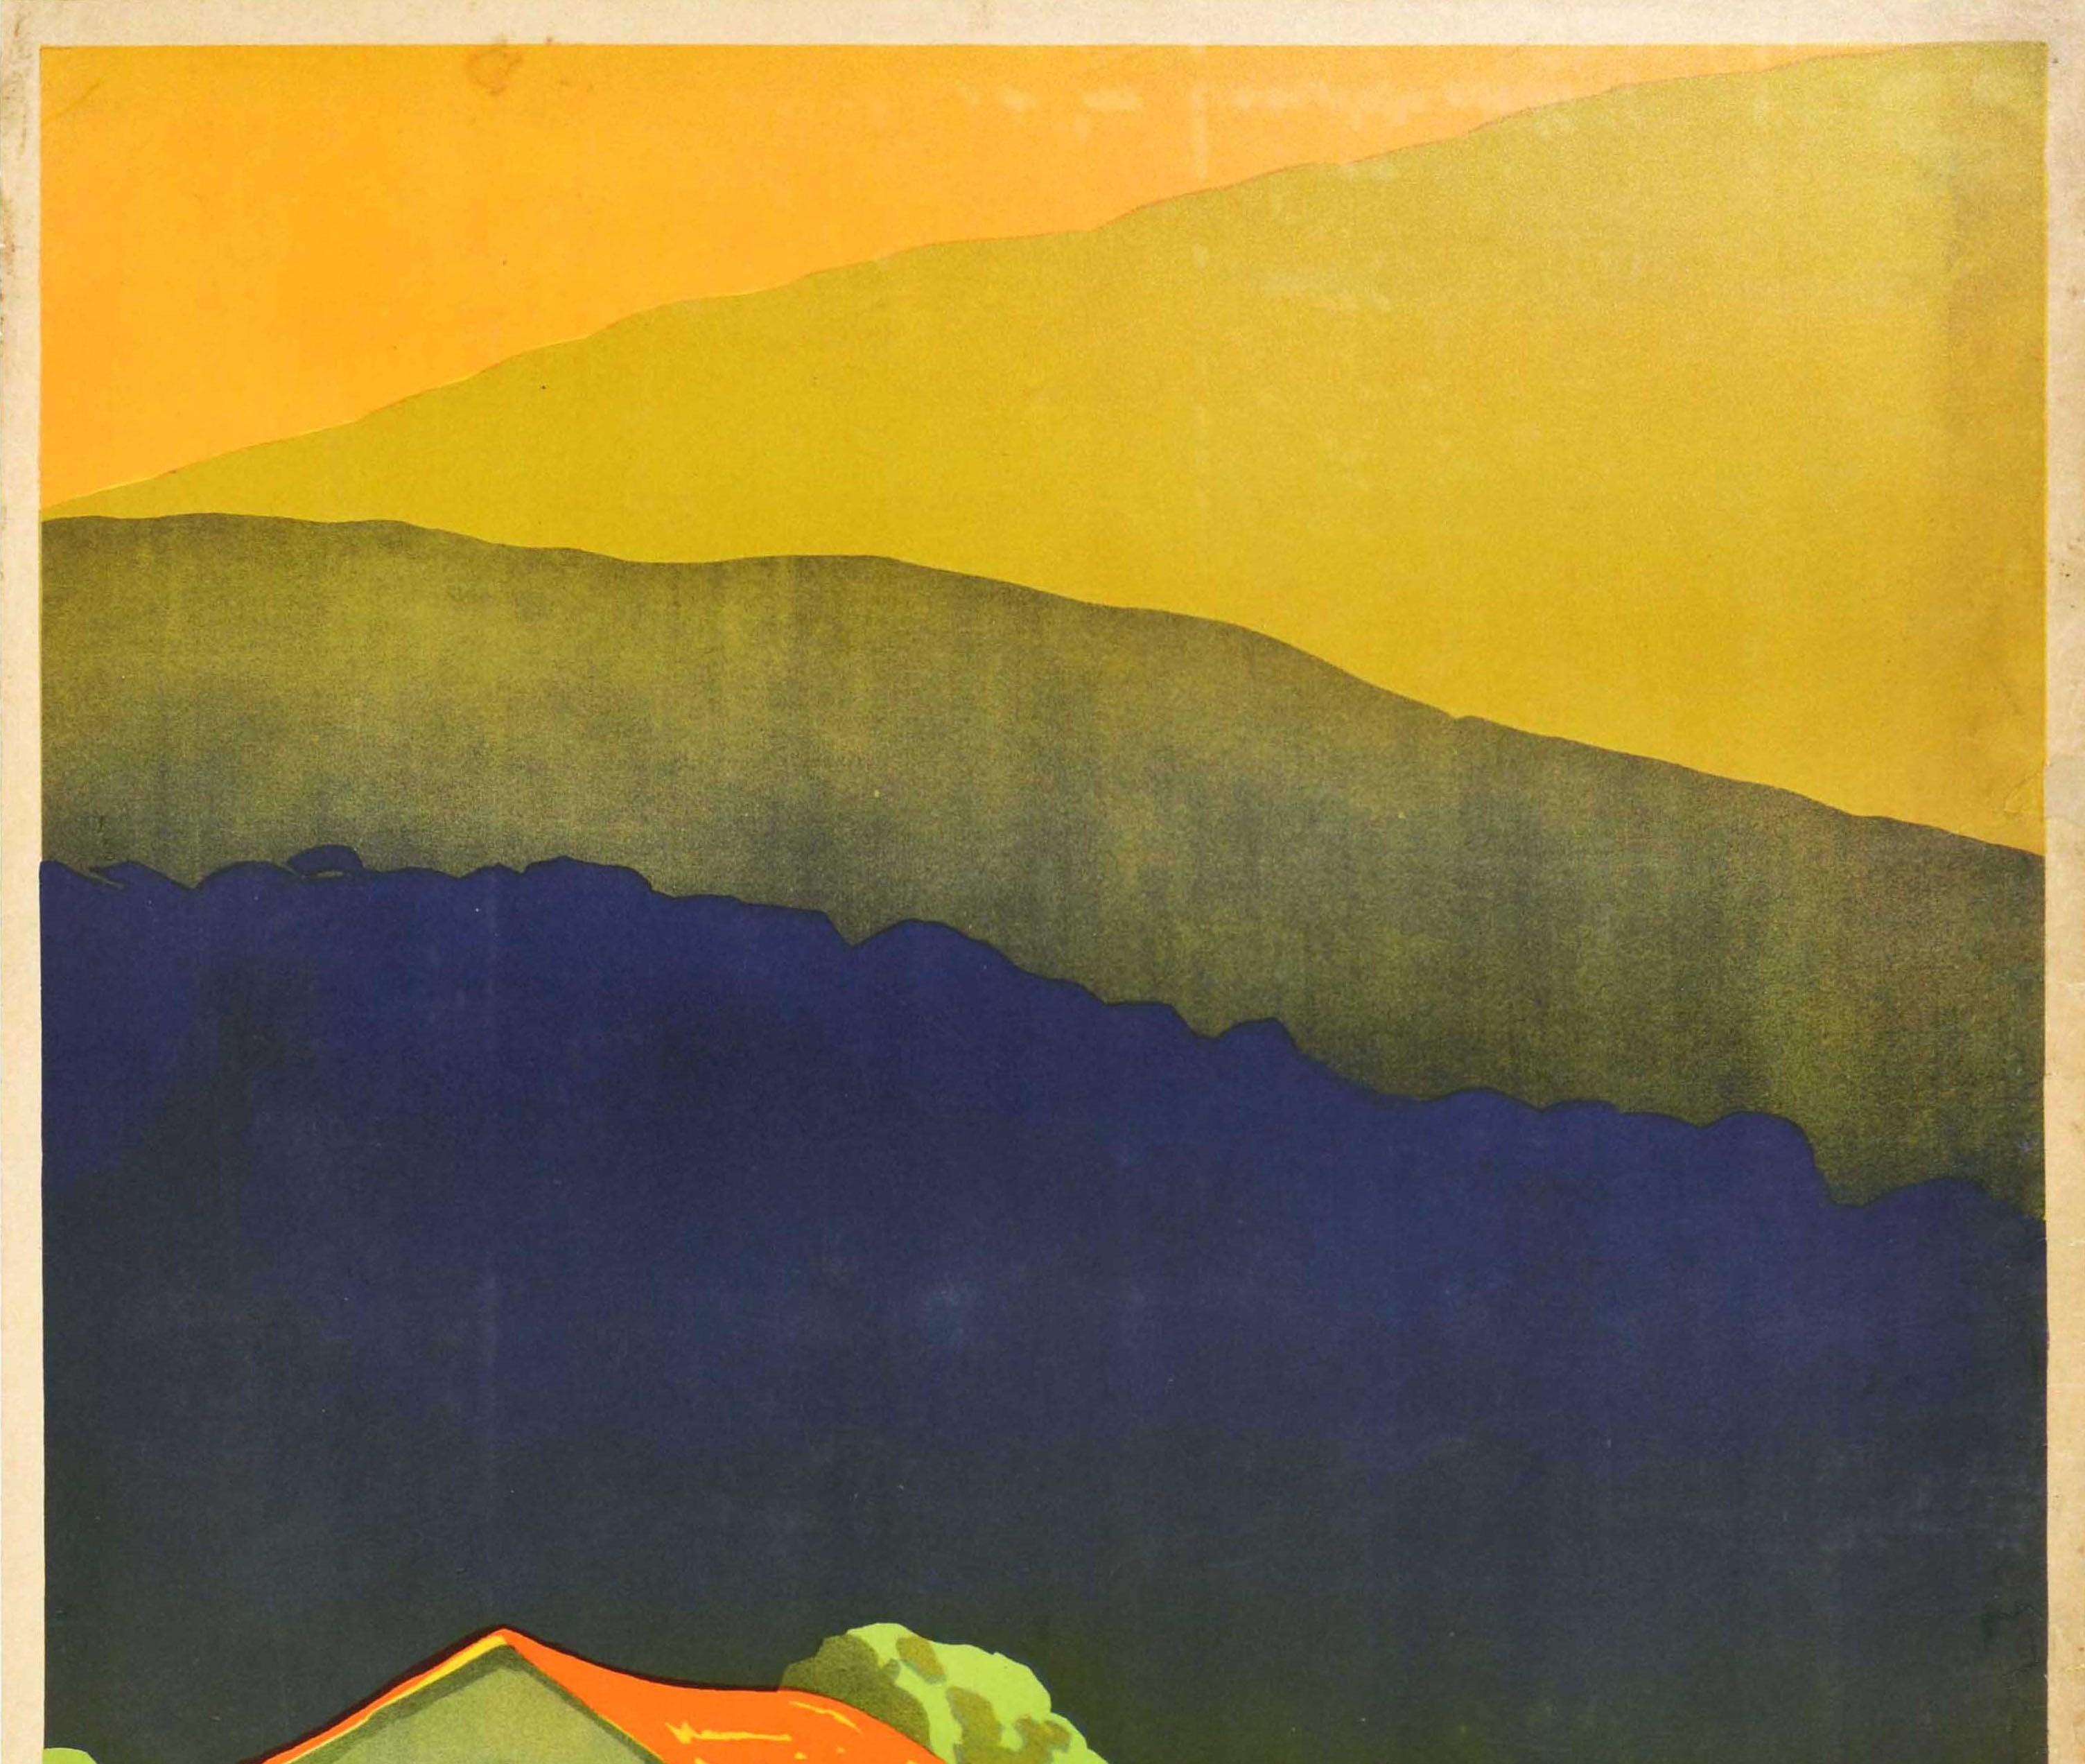 Original vintage South America travel poster - Cordoba is better in winter / Cordoba es mejor en invierno. Colourful design featuring a man on a horse riding along a countryside trail towards a house below the hills and mountains of the Valle De